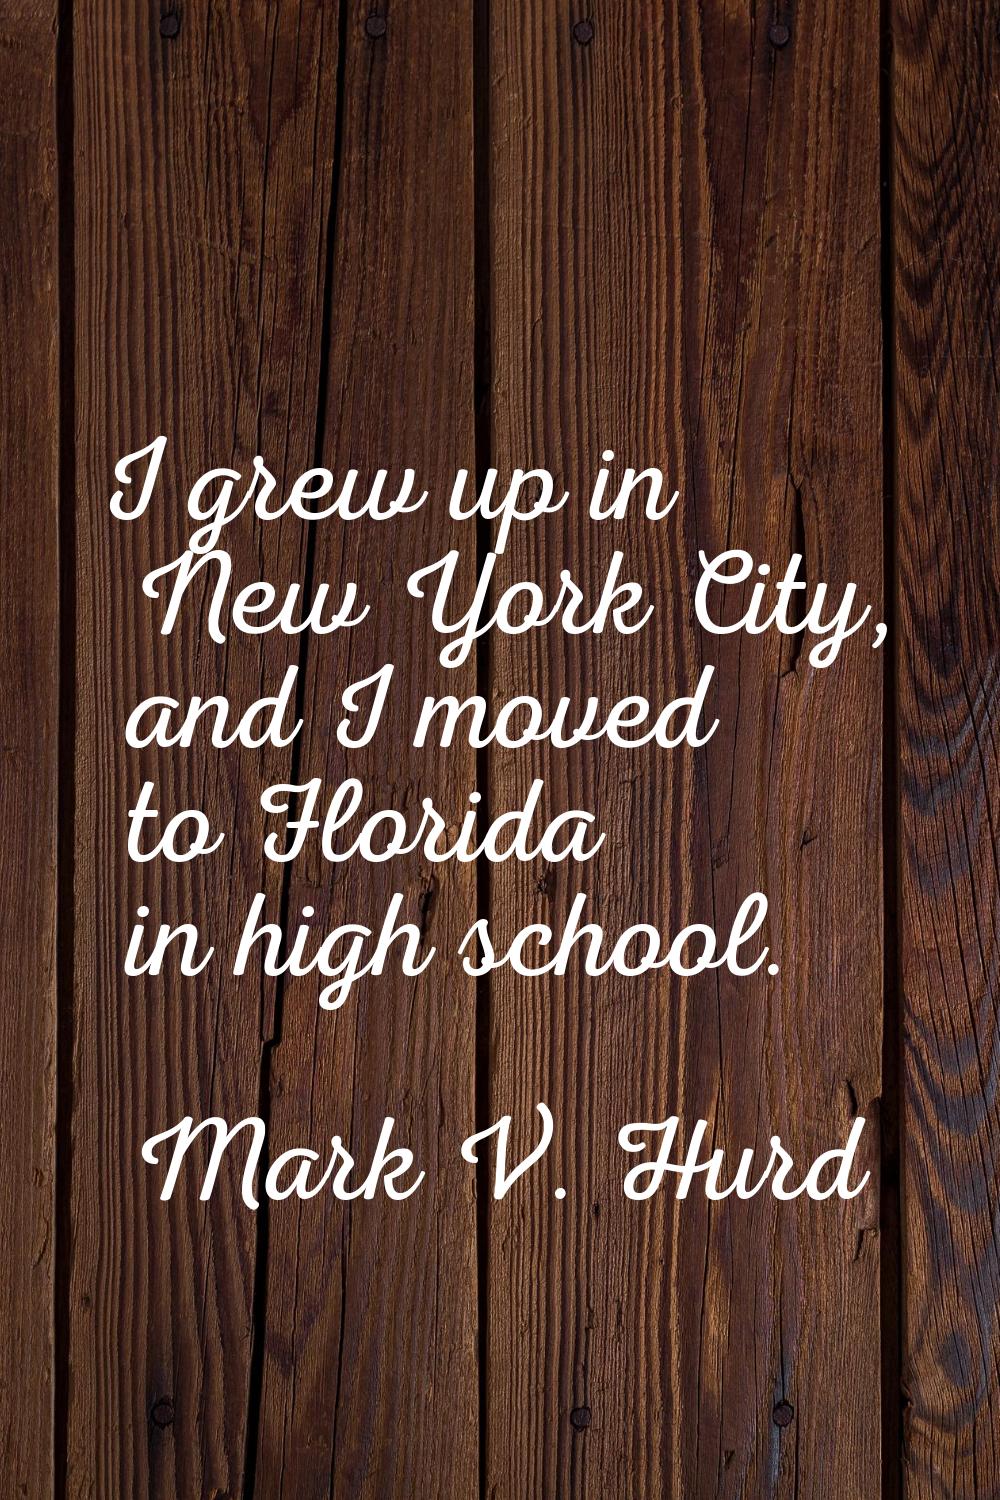 I grew up in New York City, and I moved to Florida in high school.